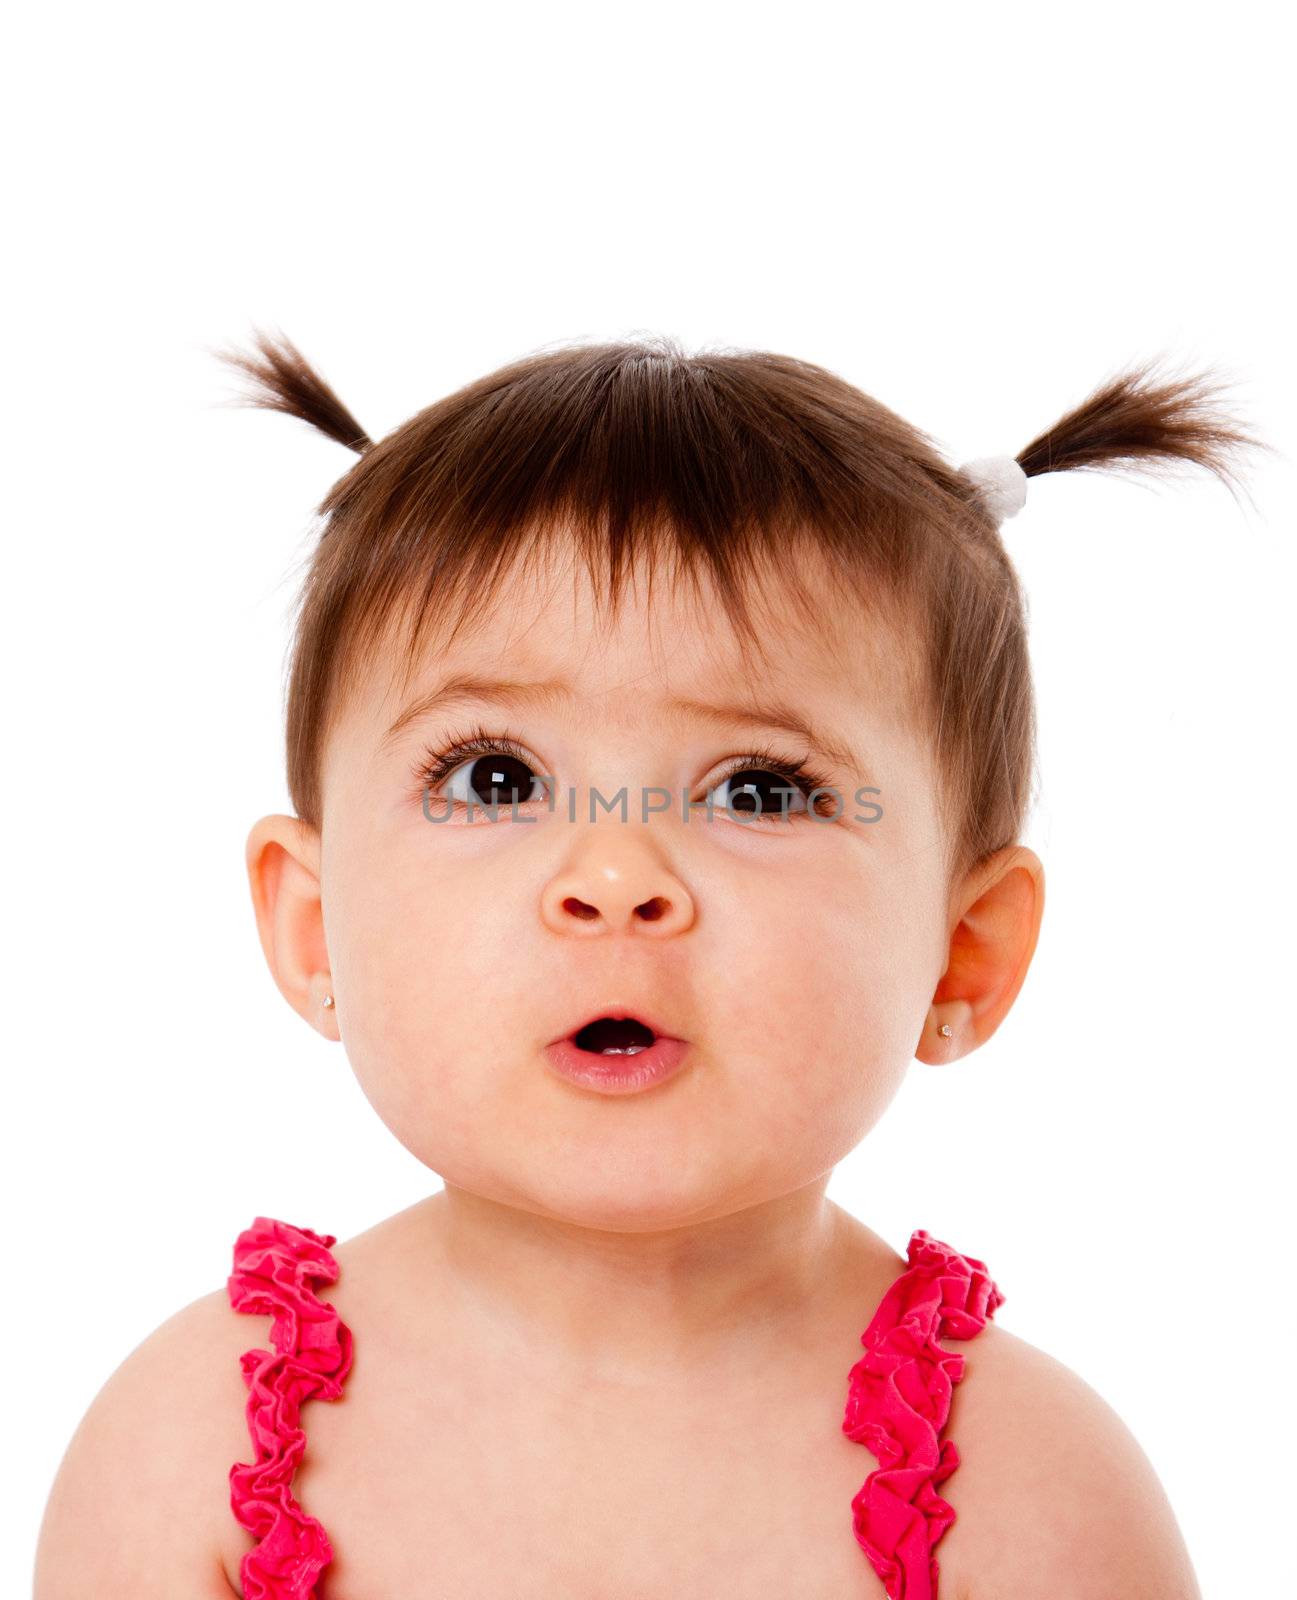 Face of cute surprised baby infant girl with ponytails, making funny mouth expression, isolated.